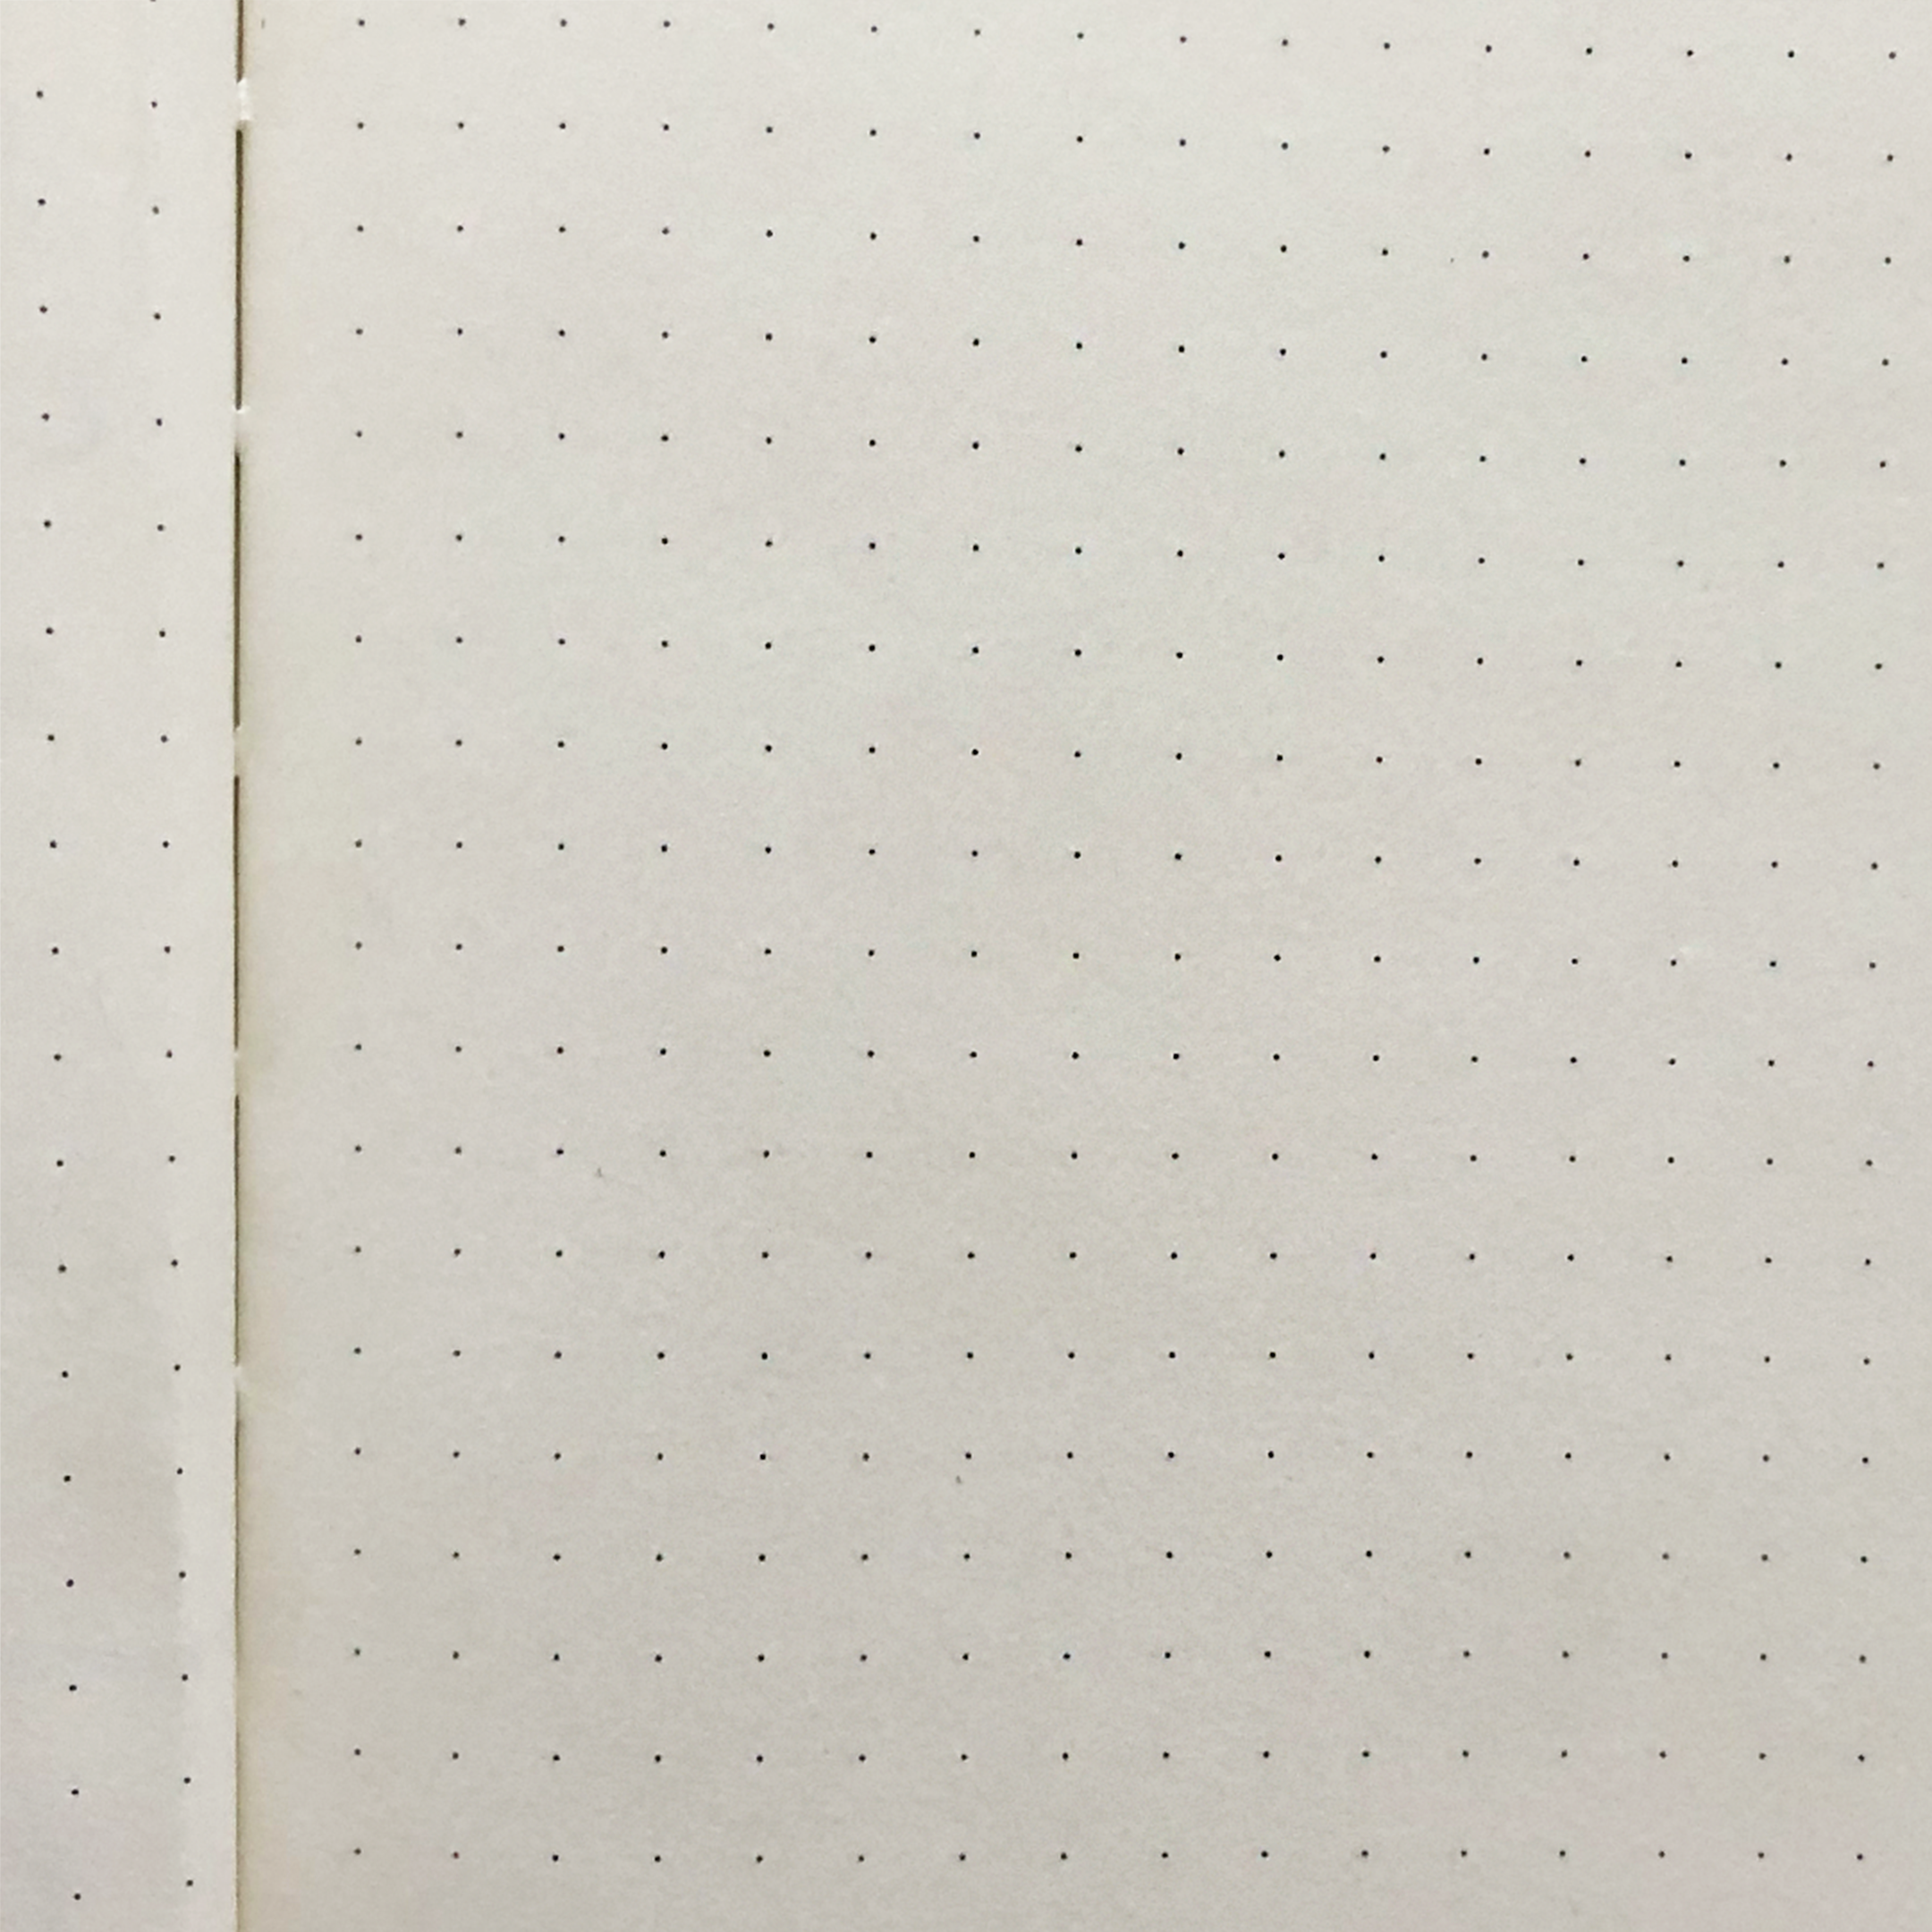 Image shows a dotted journal page